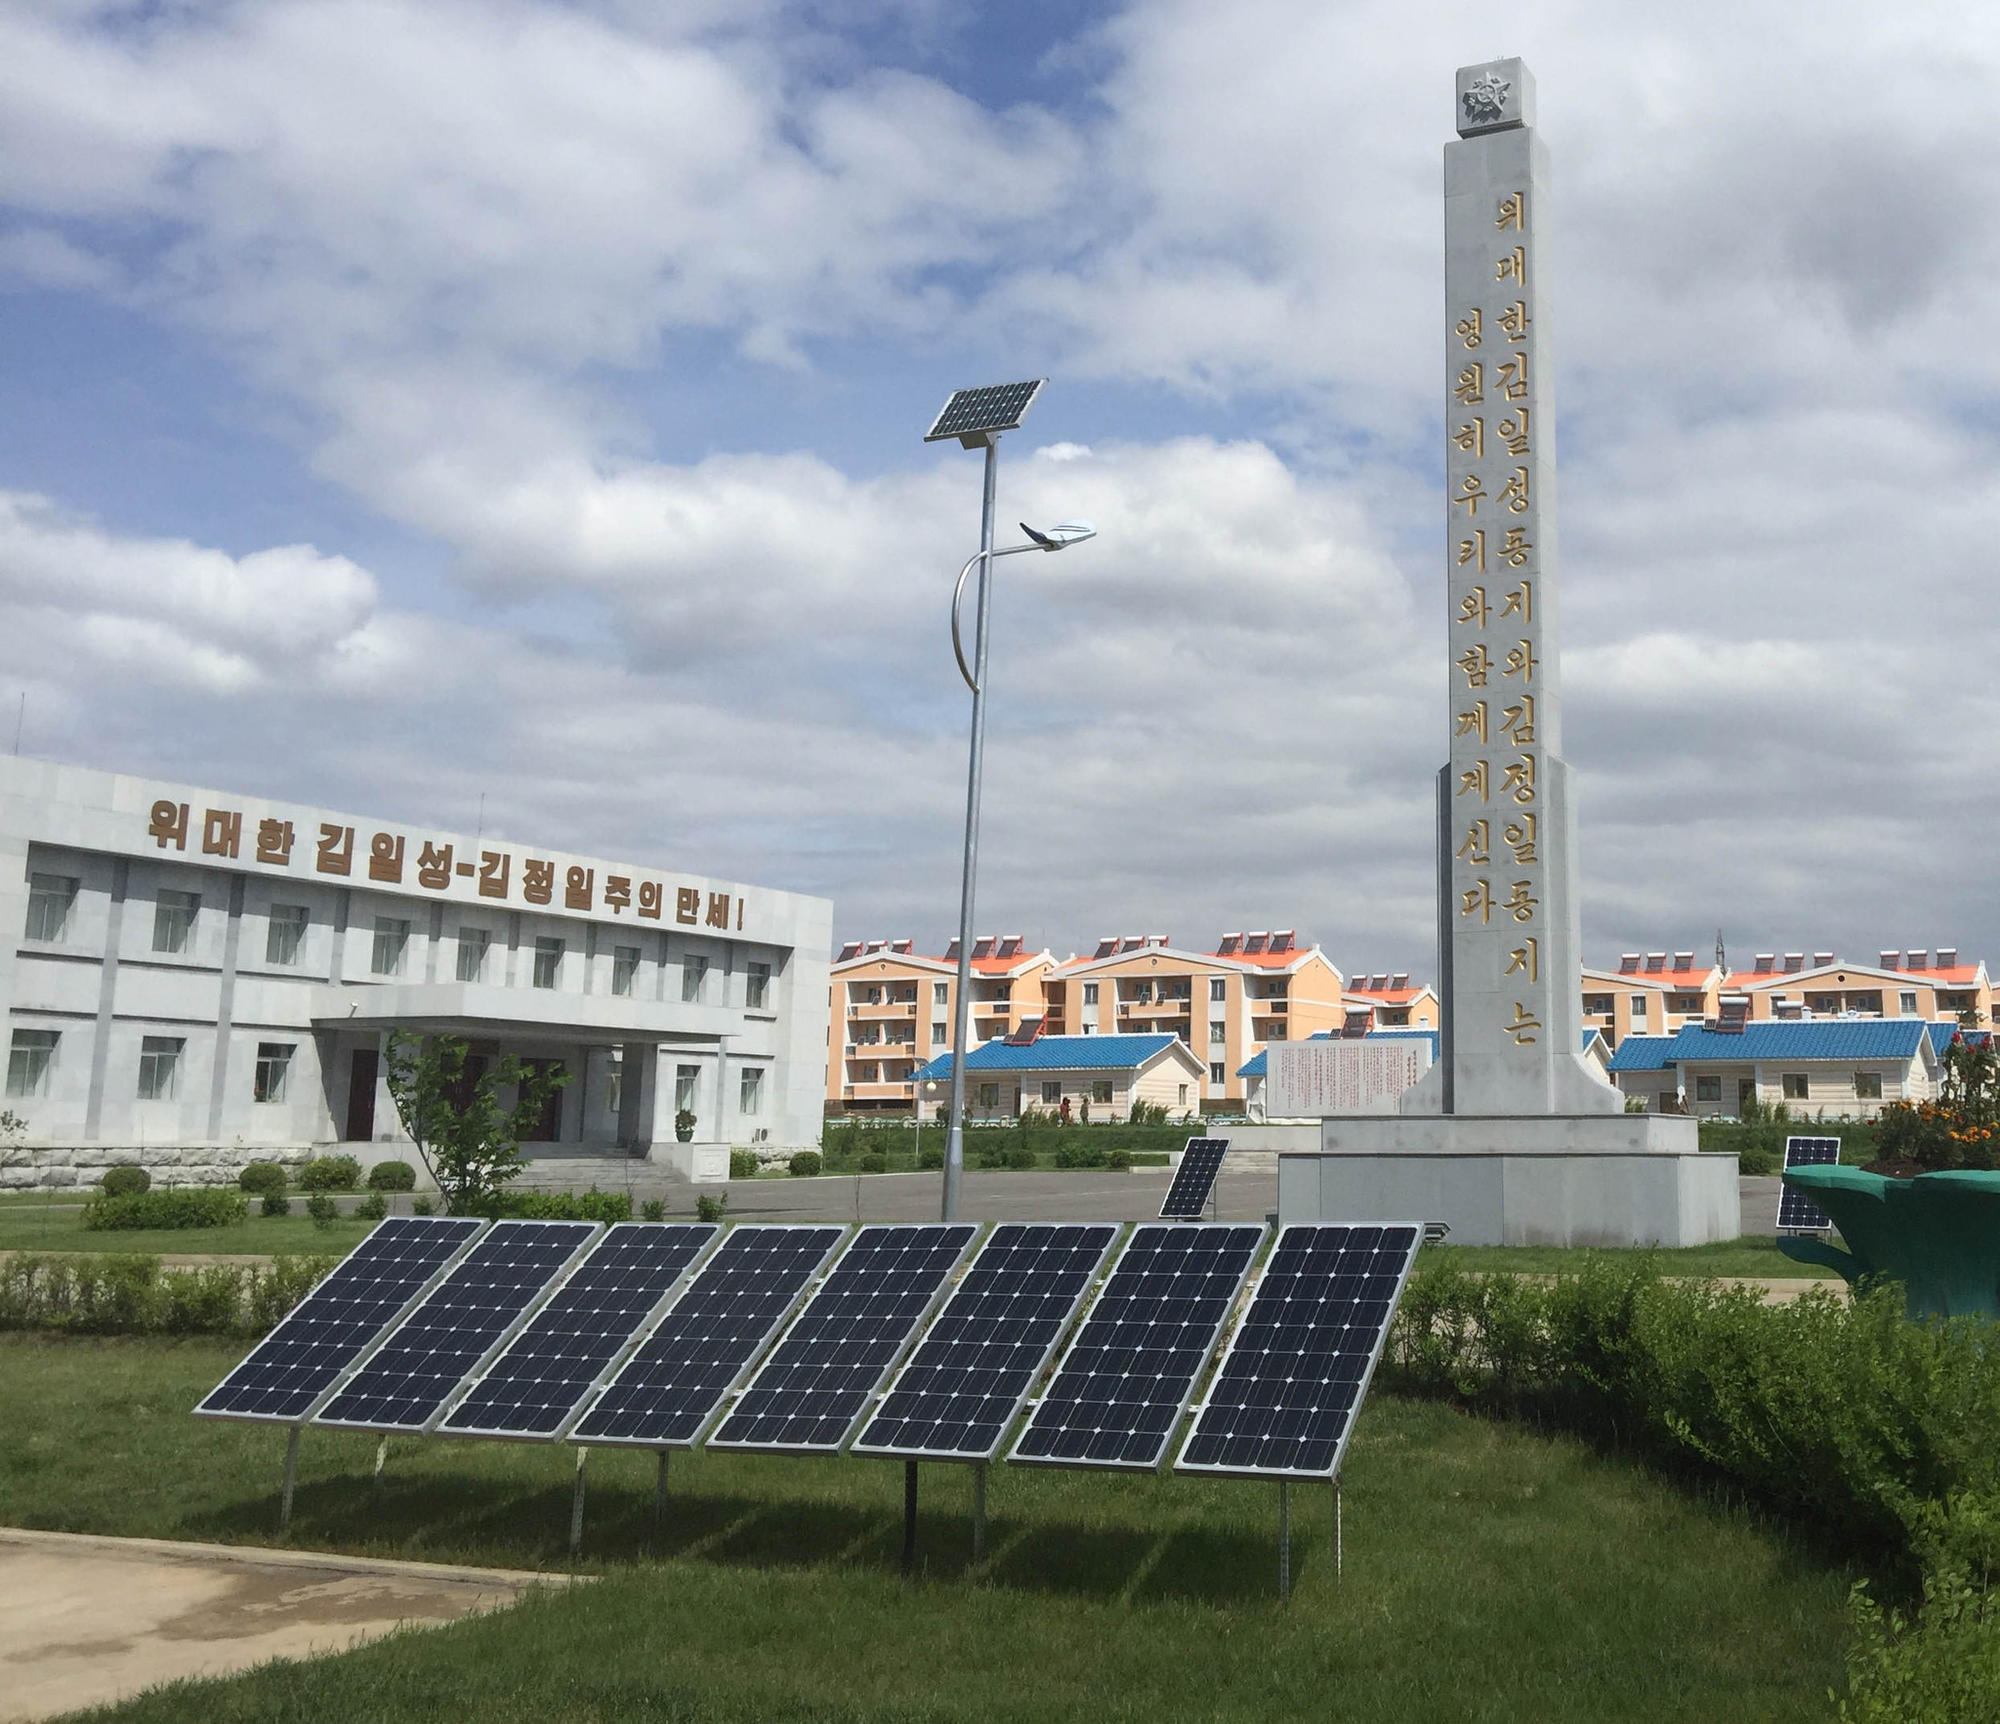 Solar panels, and a solar powered streetlight, at a farm complex on the outskirts of Pyongyang, North Korea. The worker housing in the distance has solar water heaters on the roof.